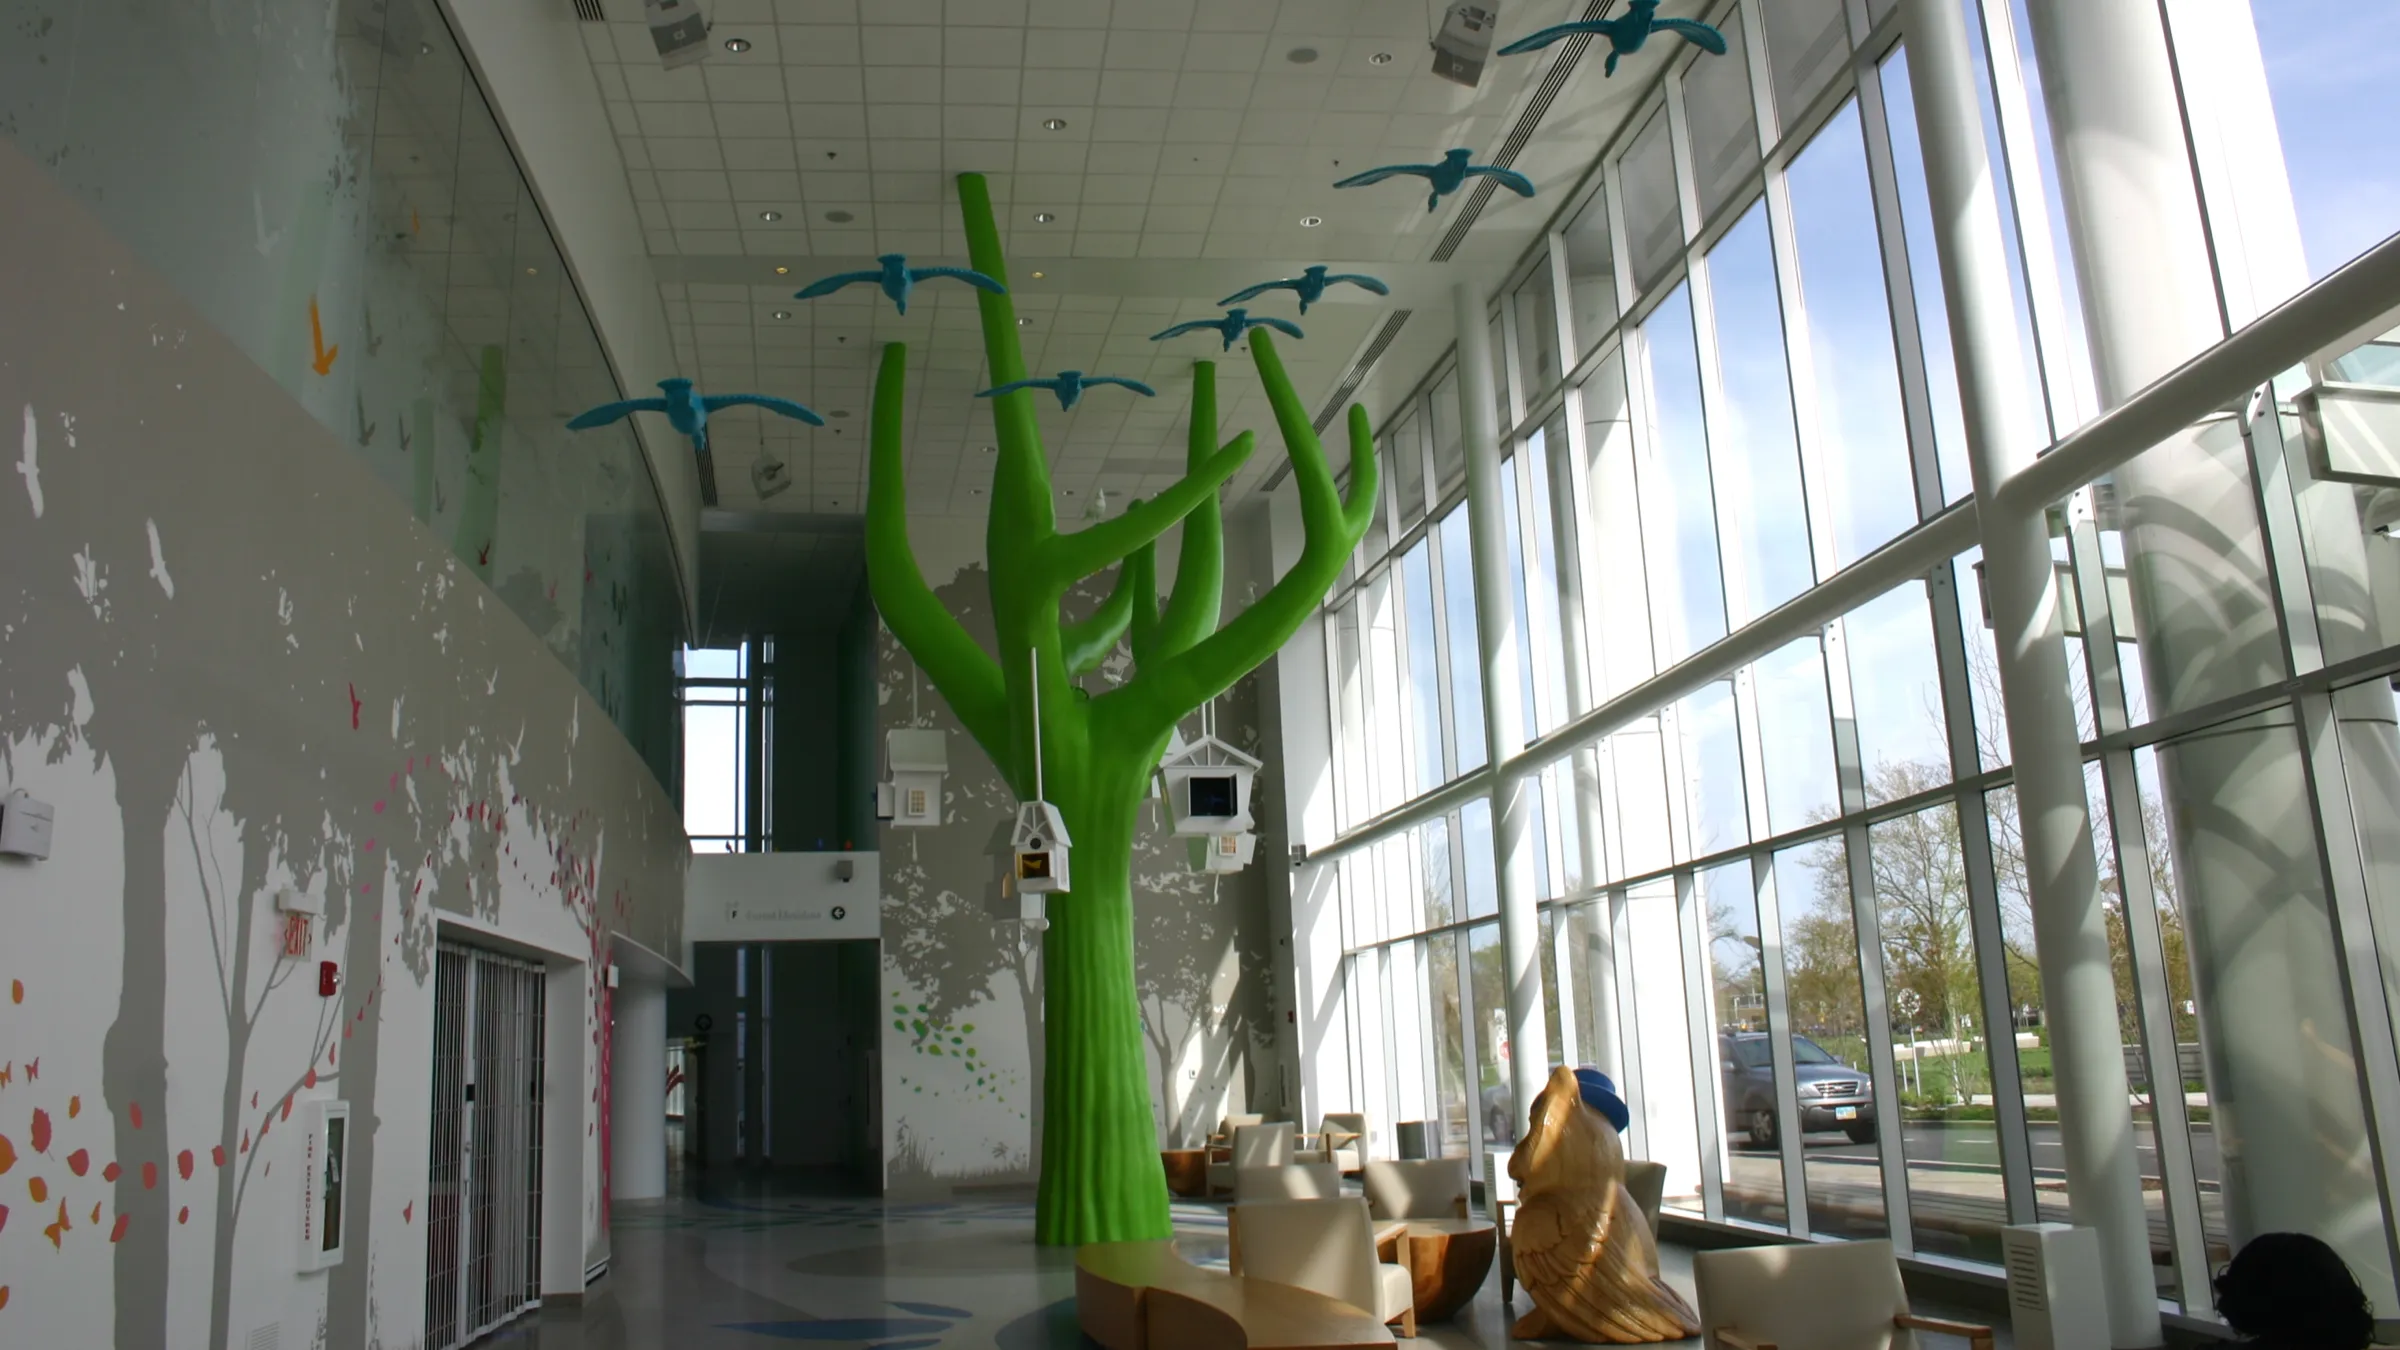 Tree in hospital hallway with birds flying and hanging birdhouses